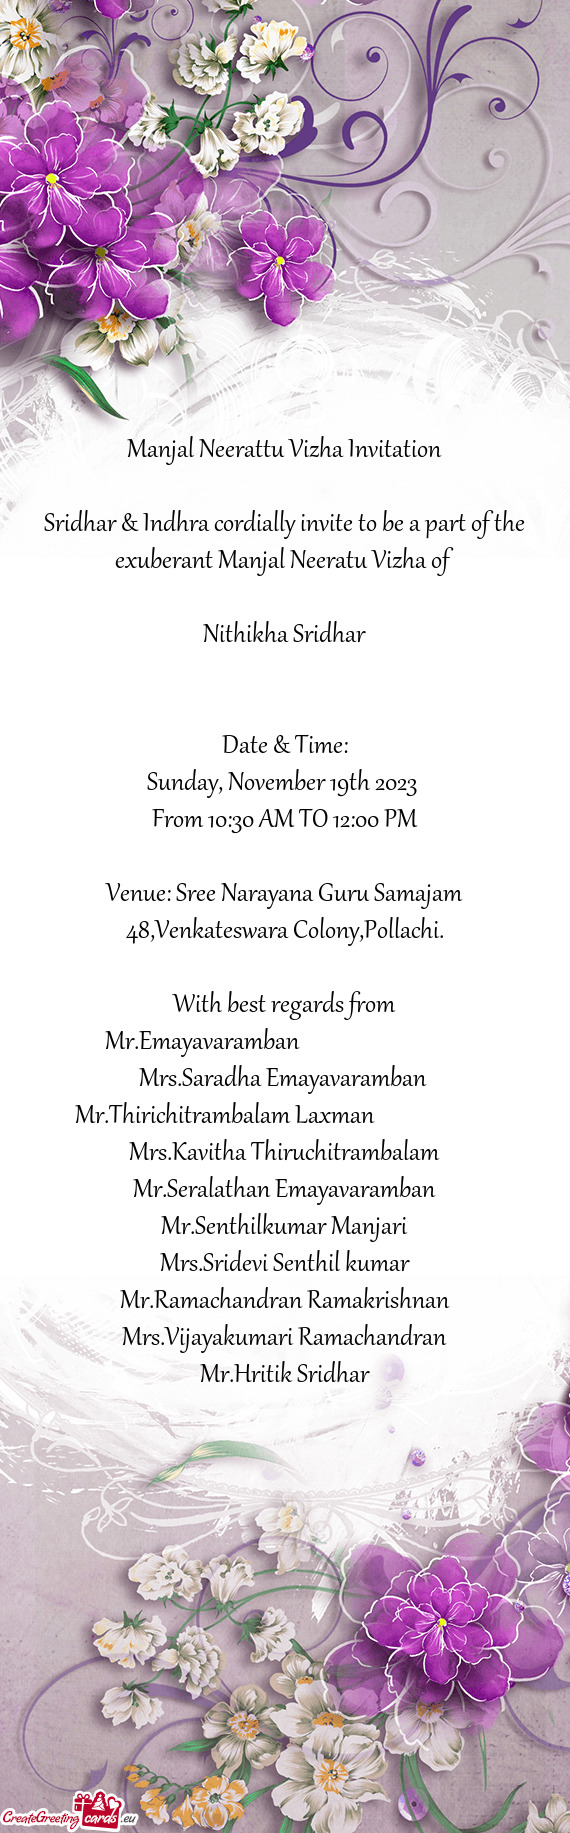 Sridhar & Indhra cordially invite to be a part of the exuberant Manjal Neeratu Vizha of